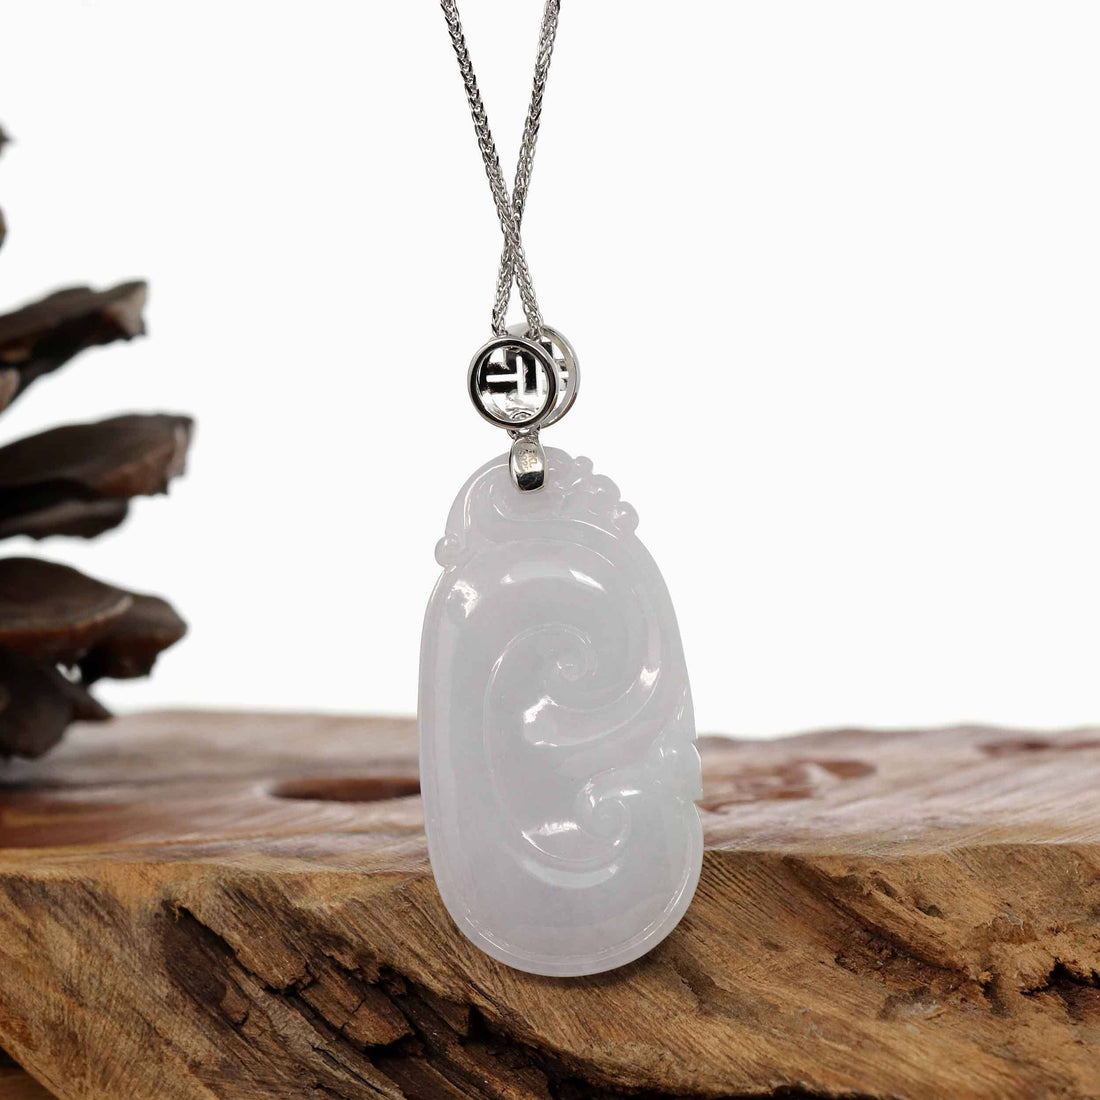 Baikalla Jewelry Jade Guanyin Pendant Necklace Copy of Genuine Lavender Jadeite Jade Ru Yi Pendant Necklace With Sterling Silver Bail